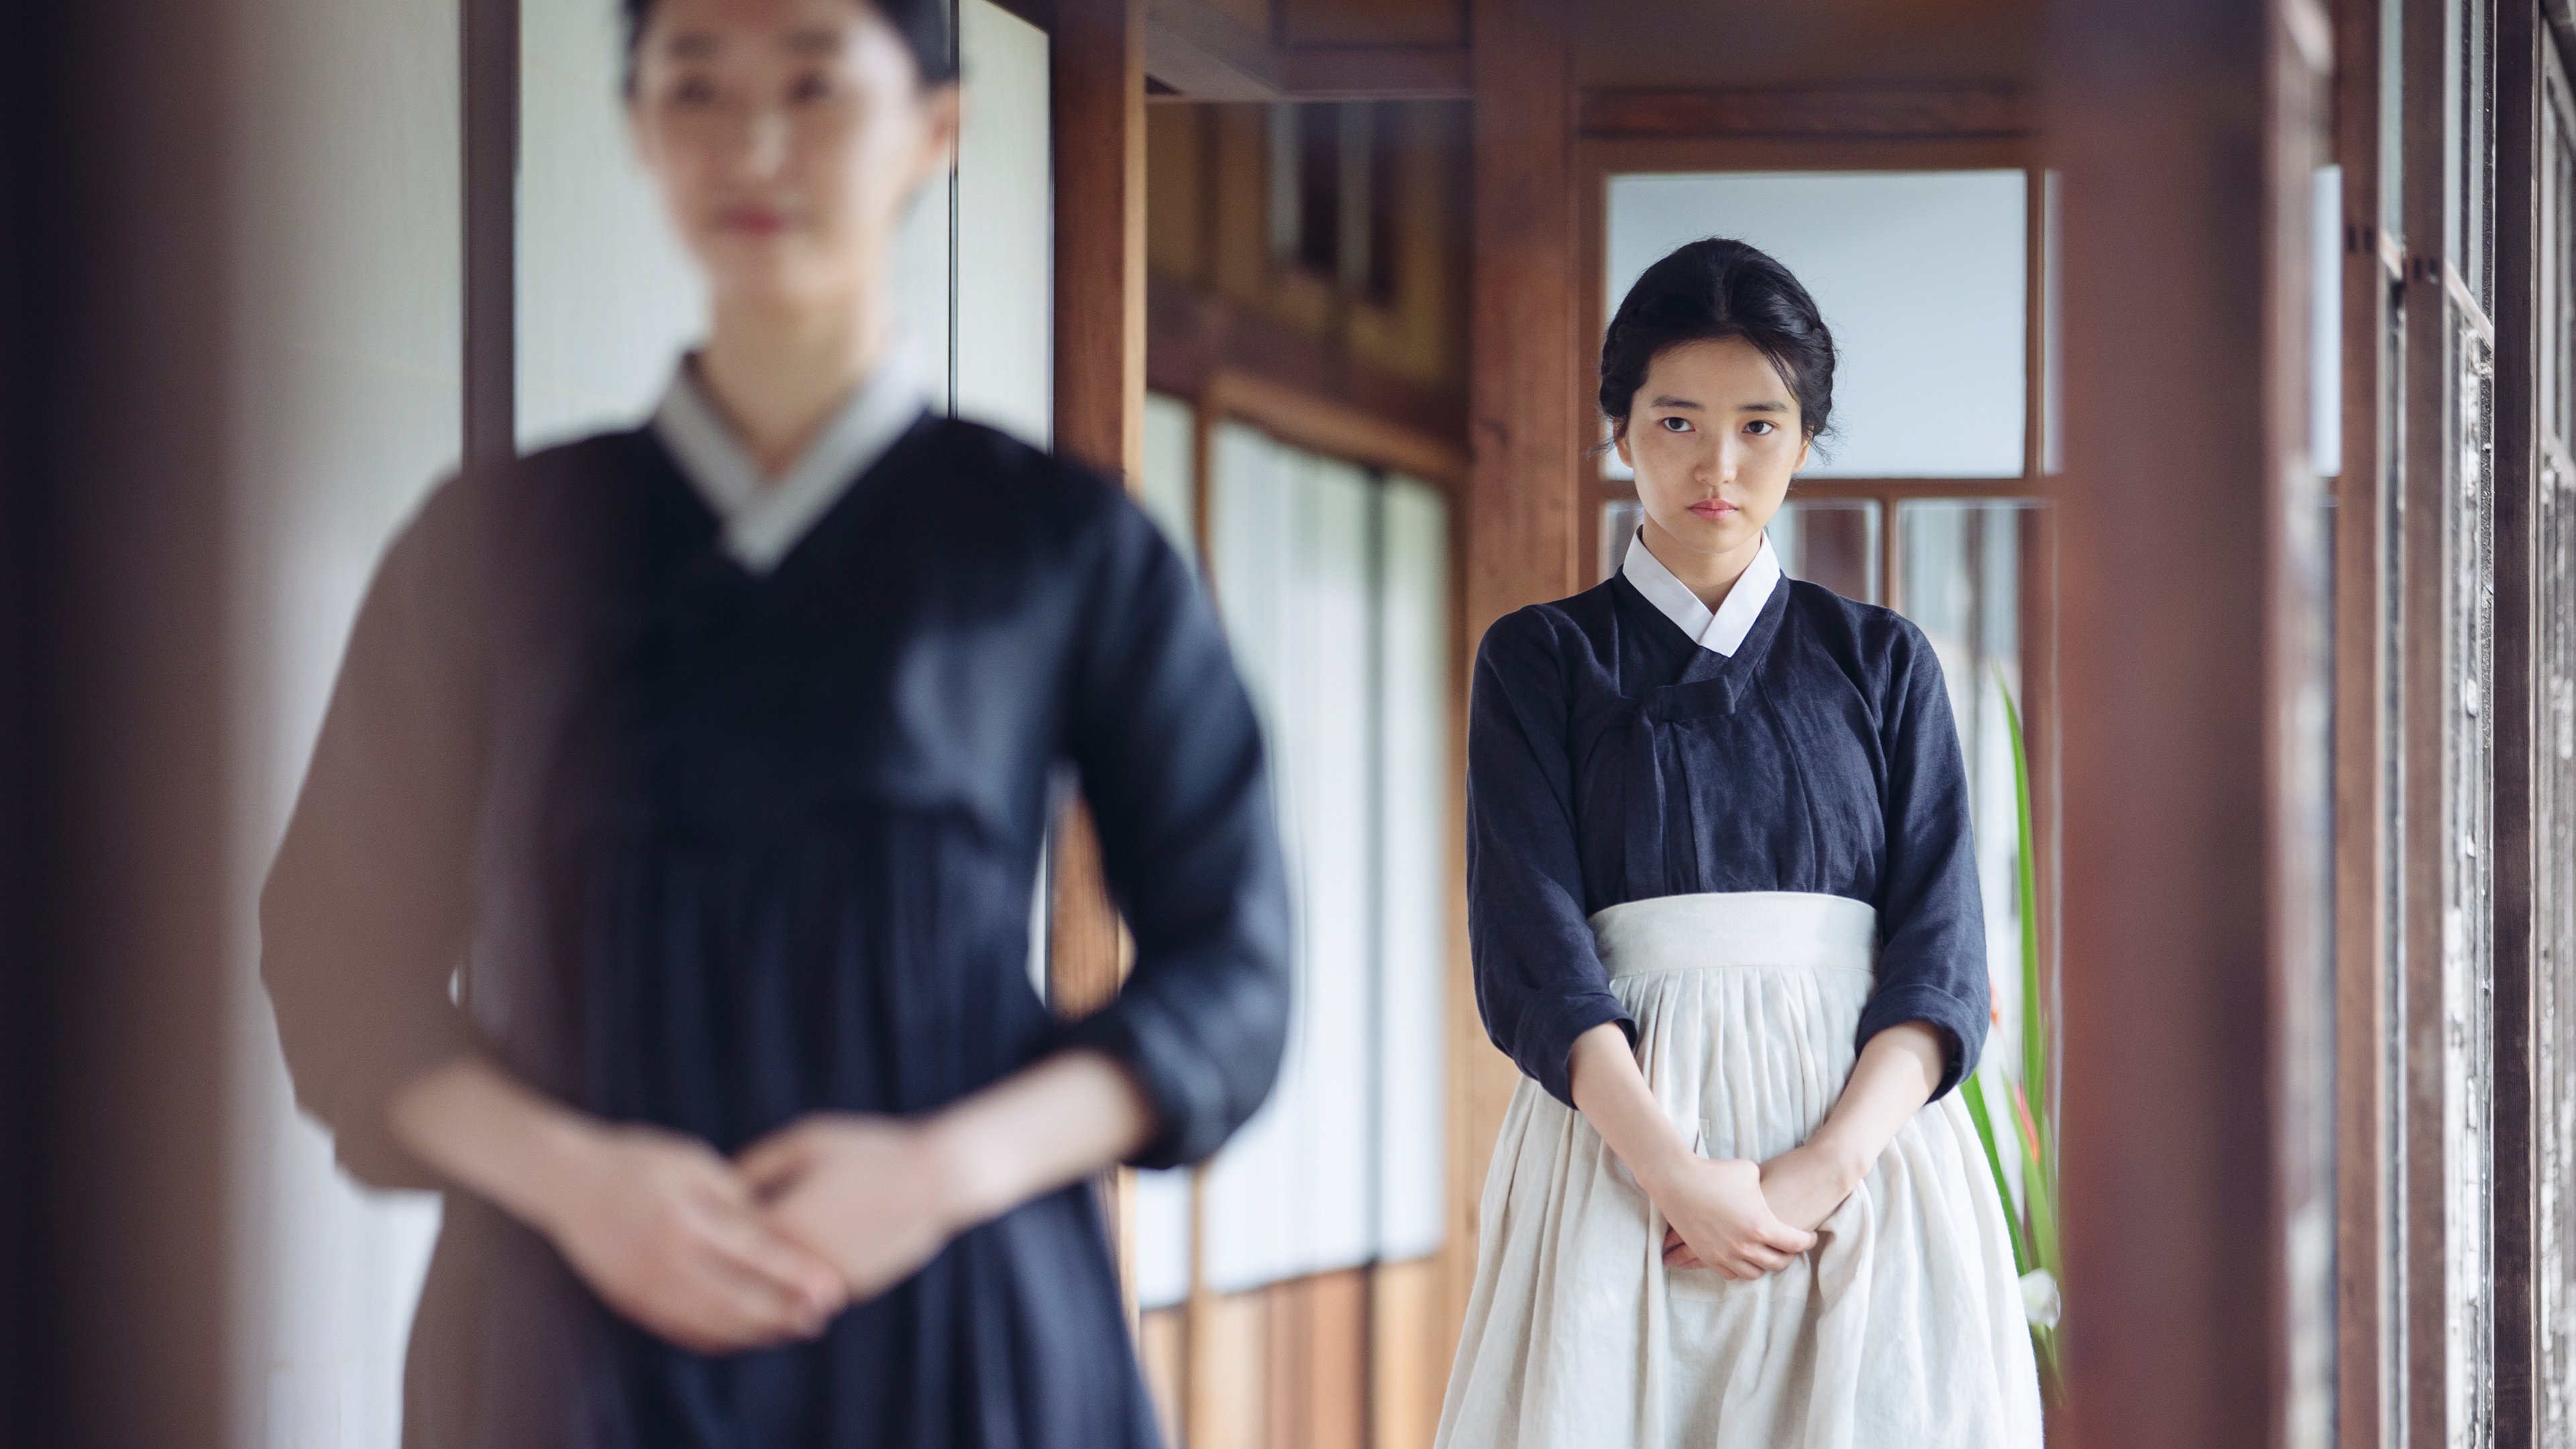 amy quincey recommends the handmaiden english subtitles pic